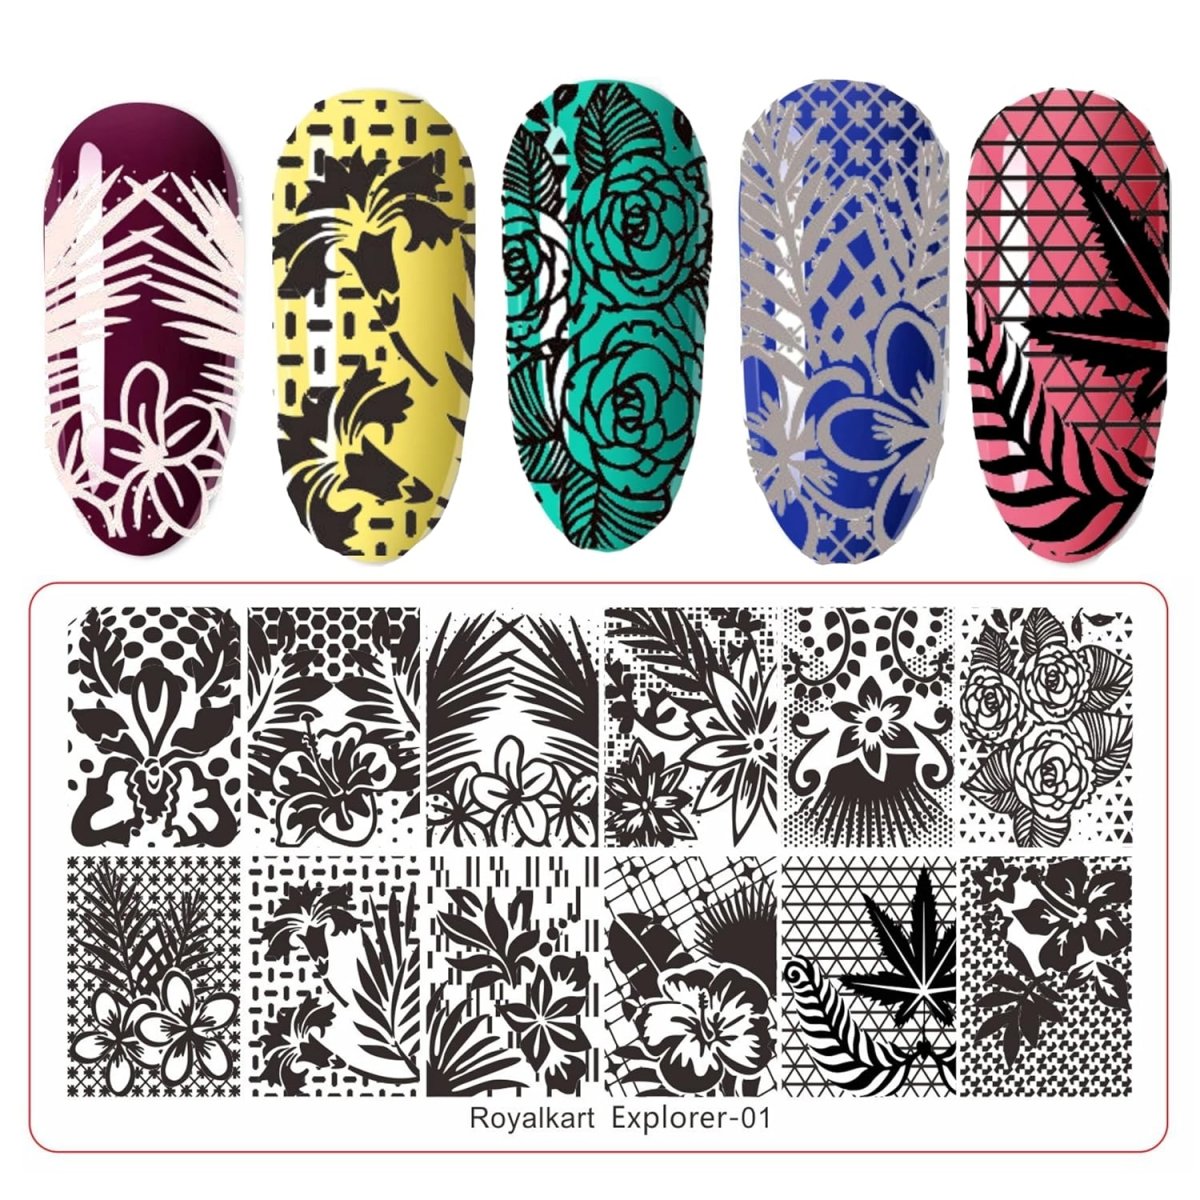 Nail Art combo kit with Nail Stamping Plate (Explorer-01) & Nail art tool Kit Nail Art Combo- #Royalkart#Explorer Collection